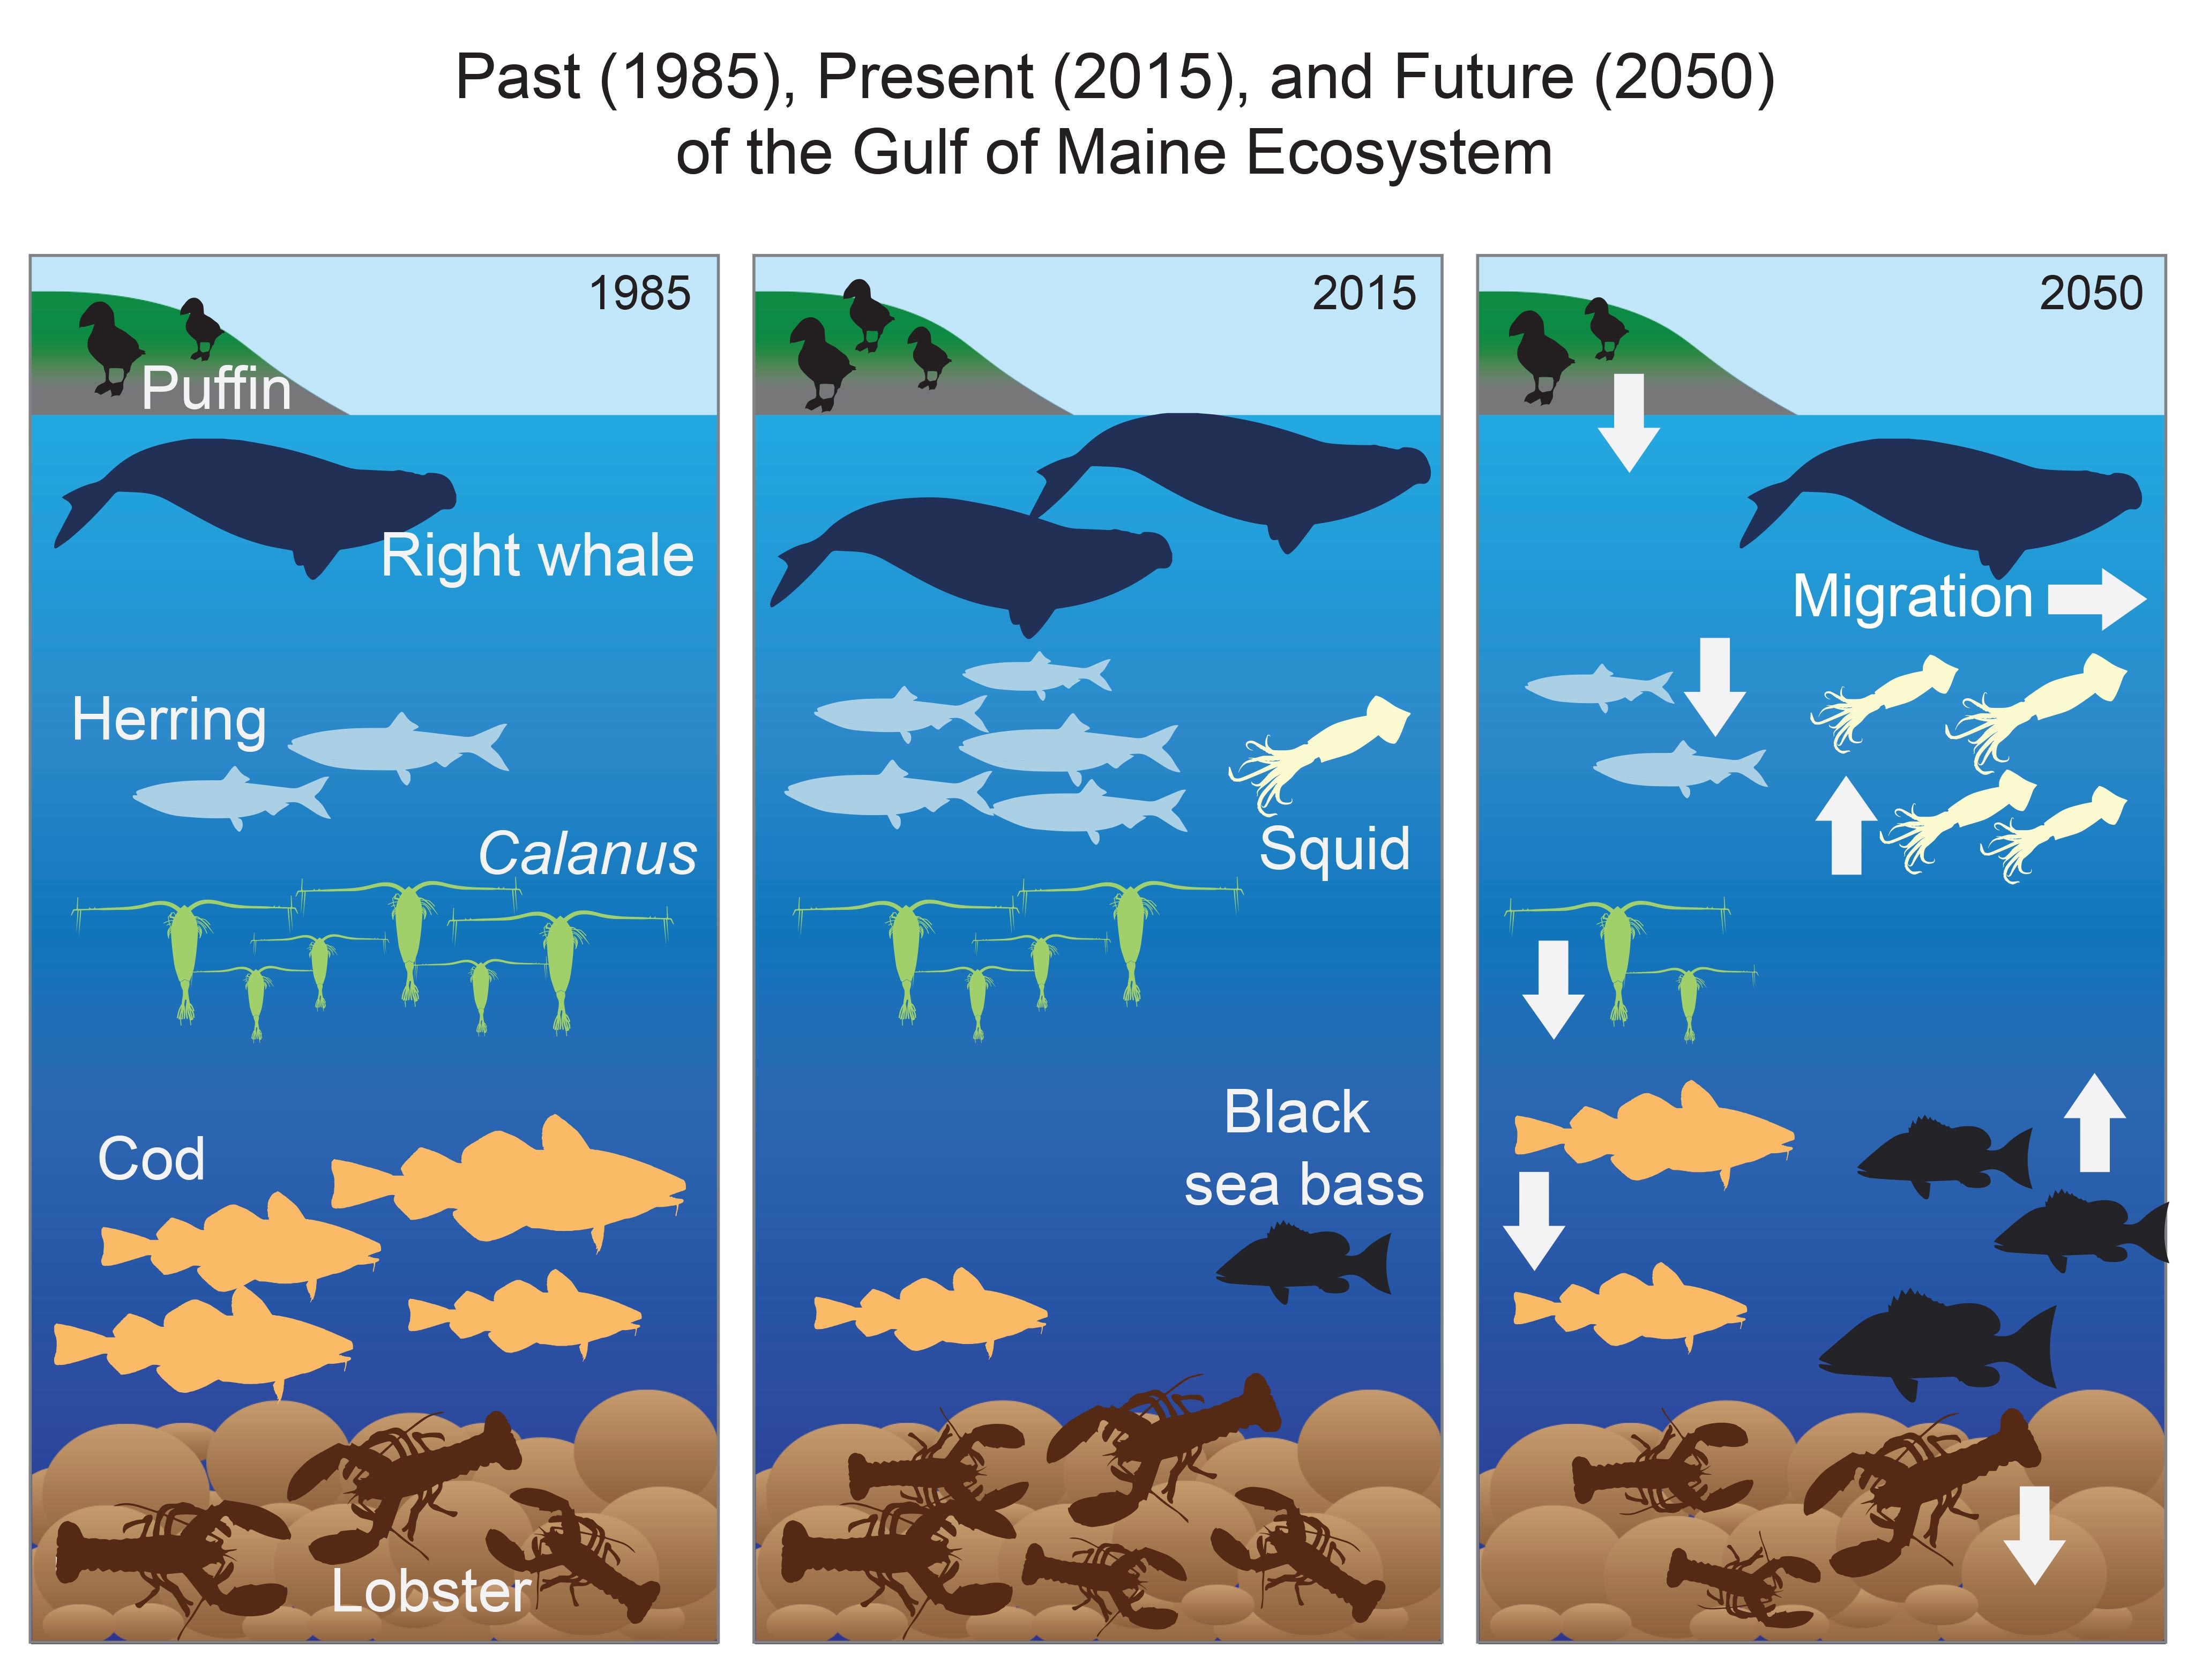 Past (1985), Present (2015), and Future (2050) of the Gulf of Maine Ecosystem